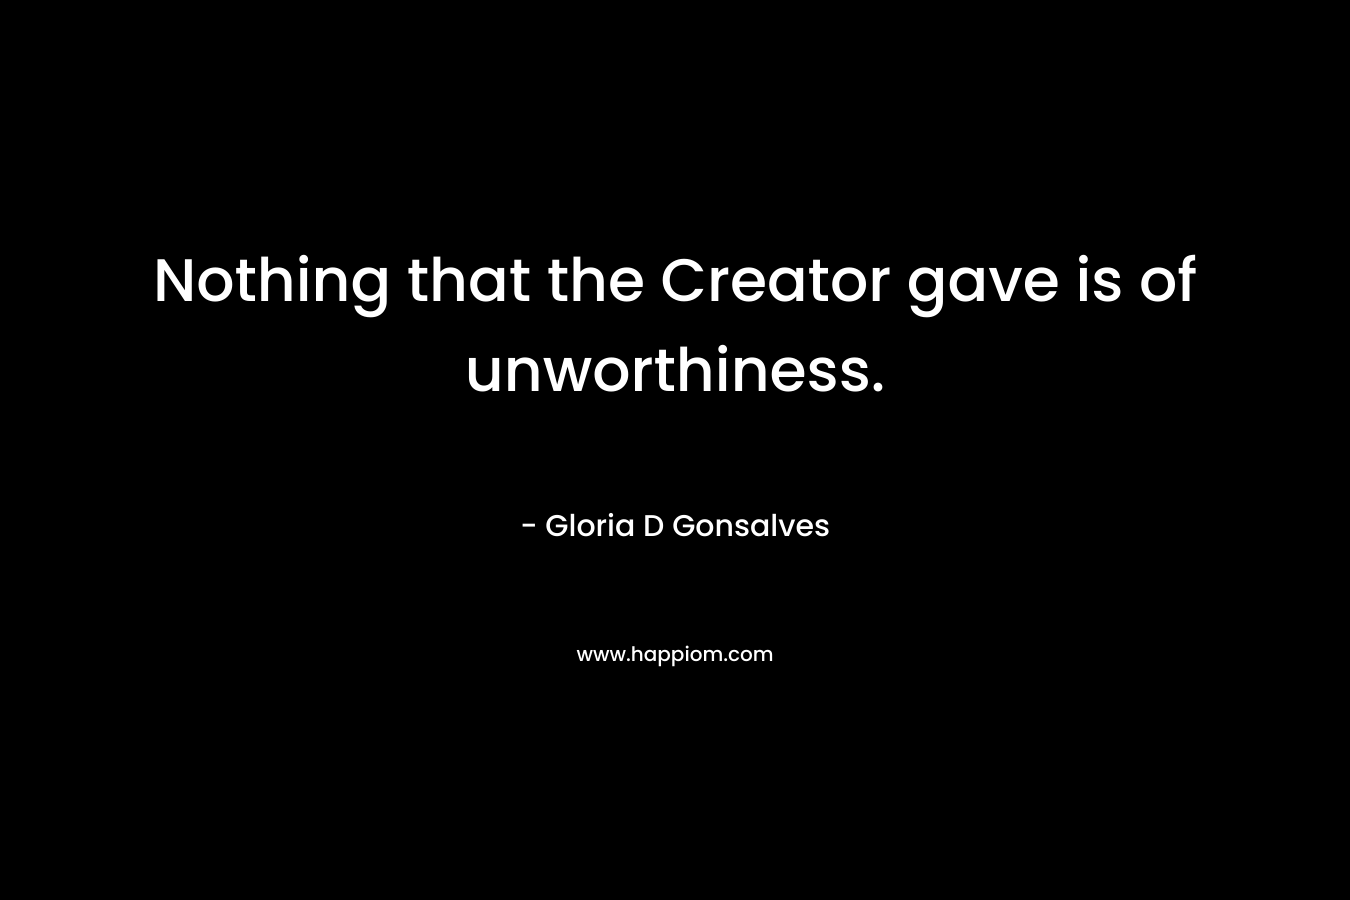 Nothing that the Creator gave is of unworthiness.